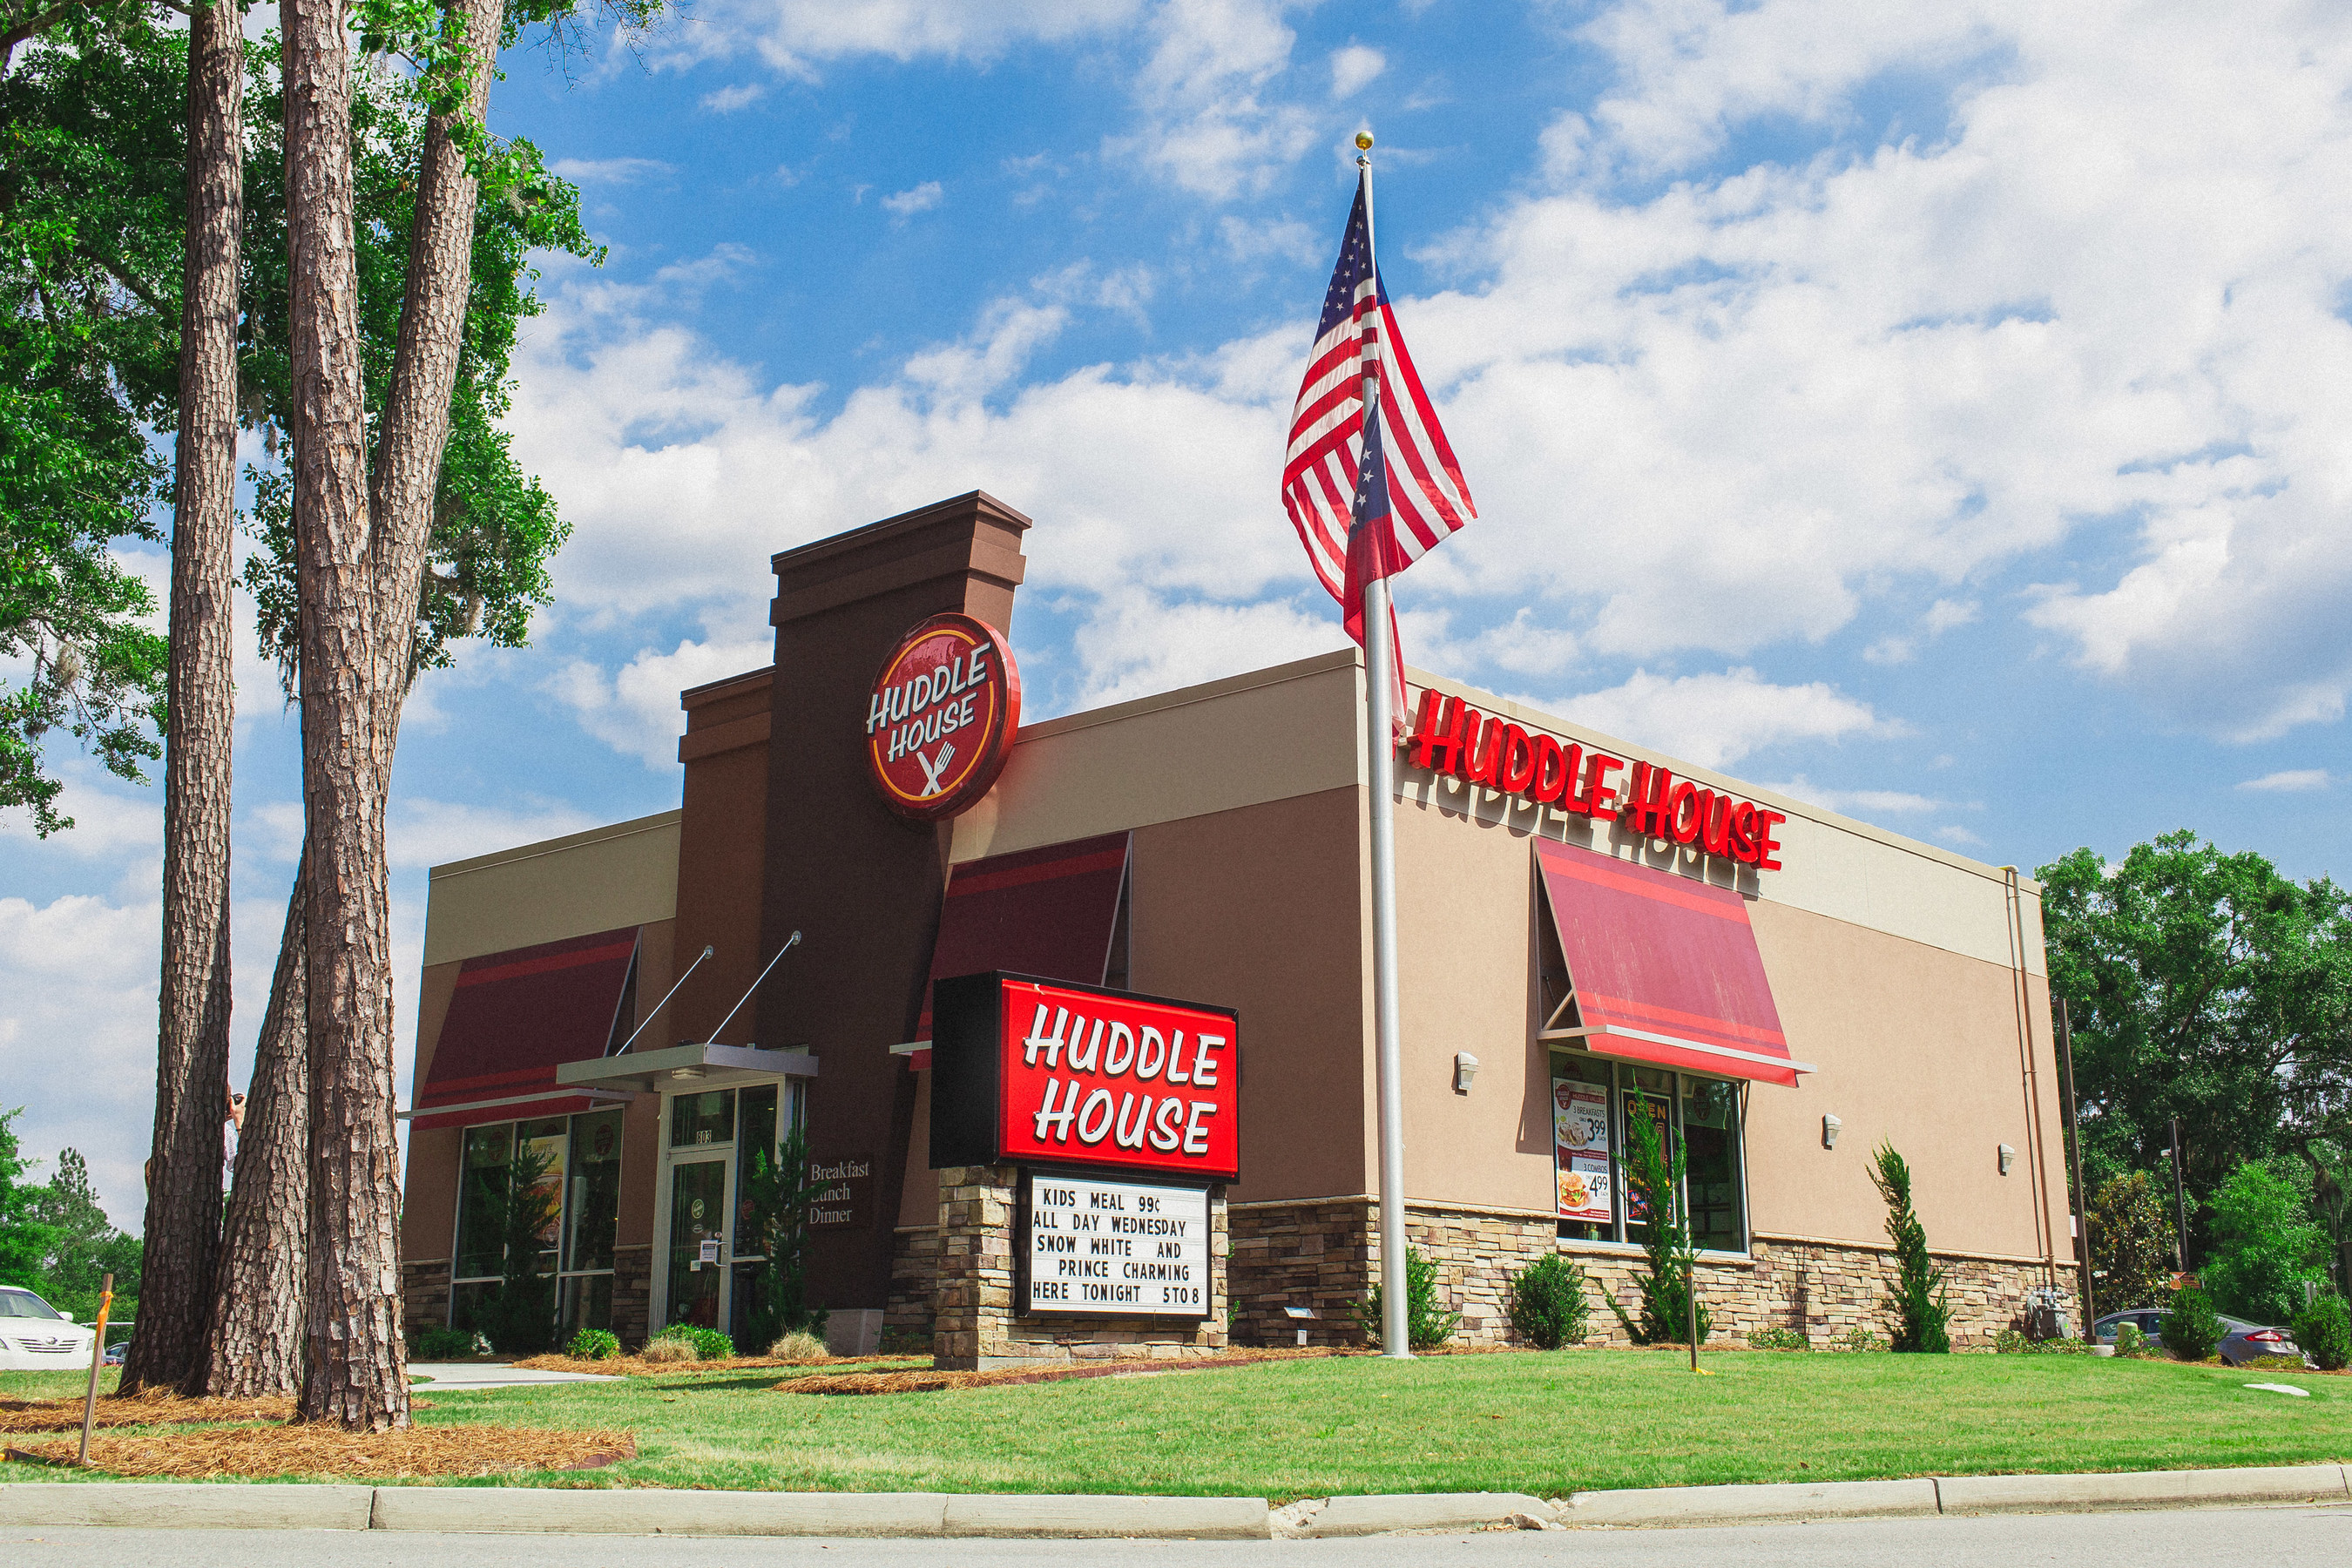 Photo of a Huddle House restaurant location. Huddle House has partnered with customer analytics firm Buxton to support franchise growth and site selection initiatives.